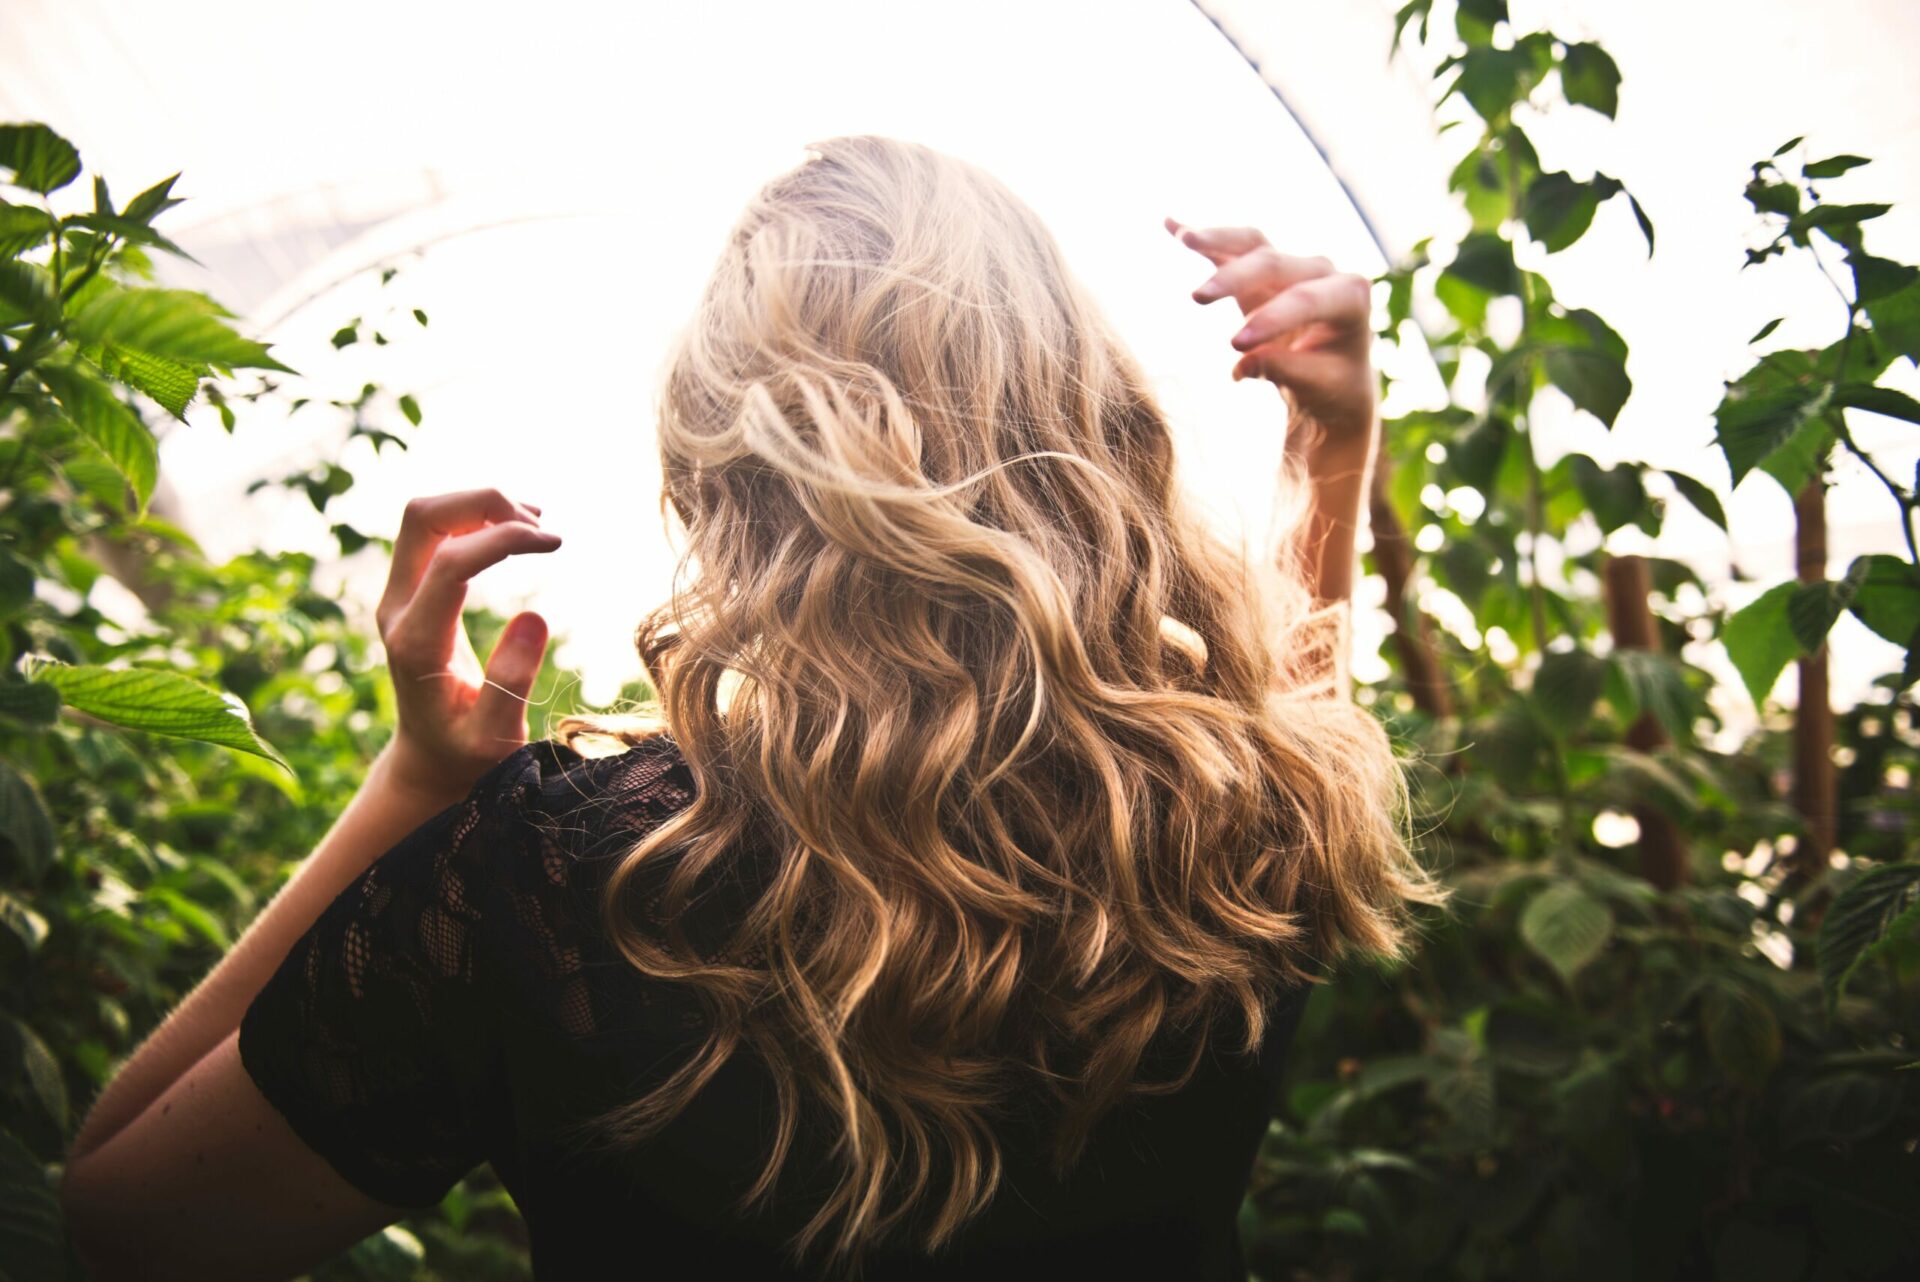 Get Heatless Curls You’ll Love with Our Eco-Friendly Styling Tips